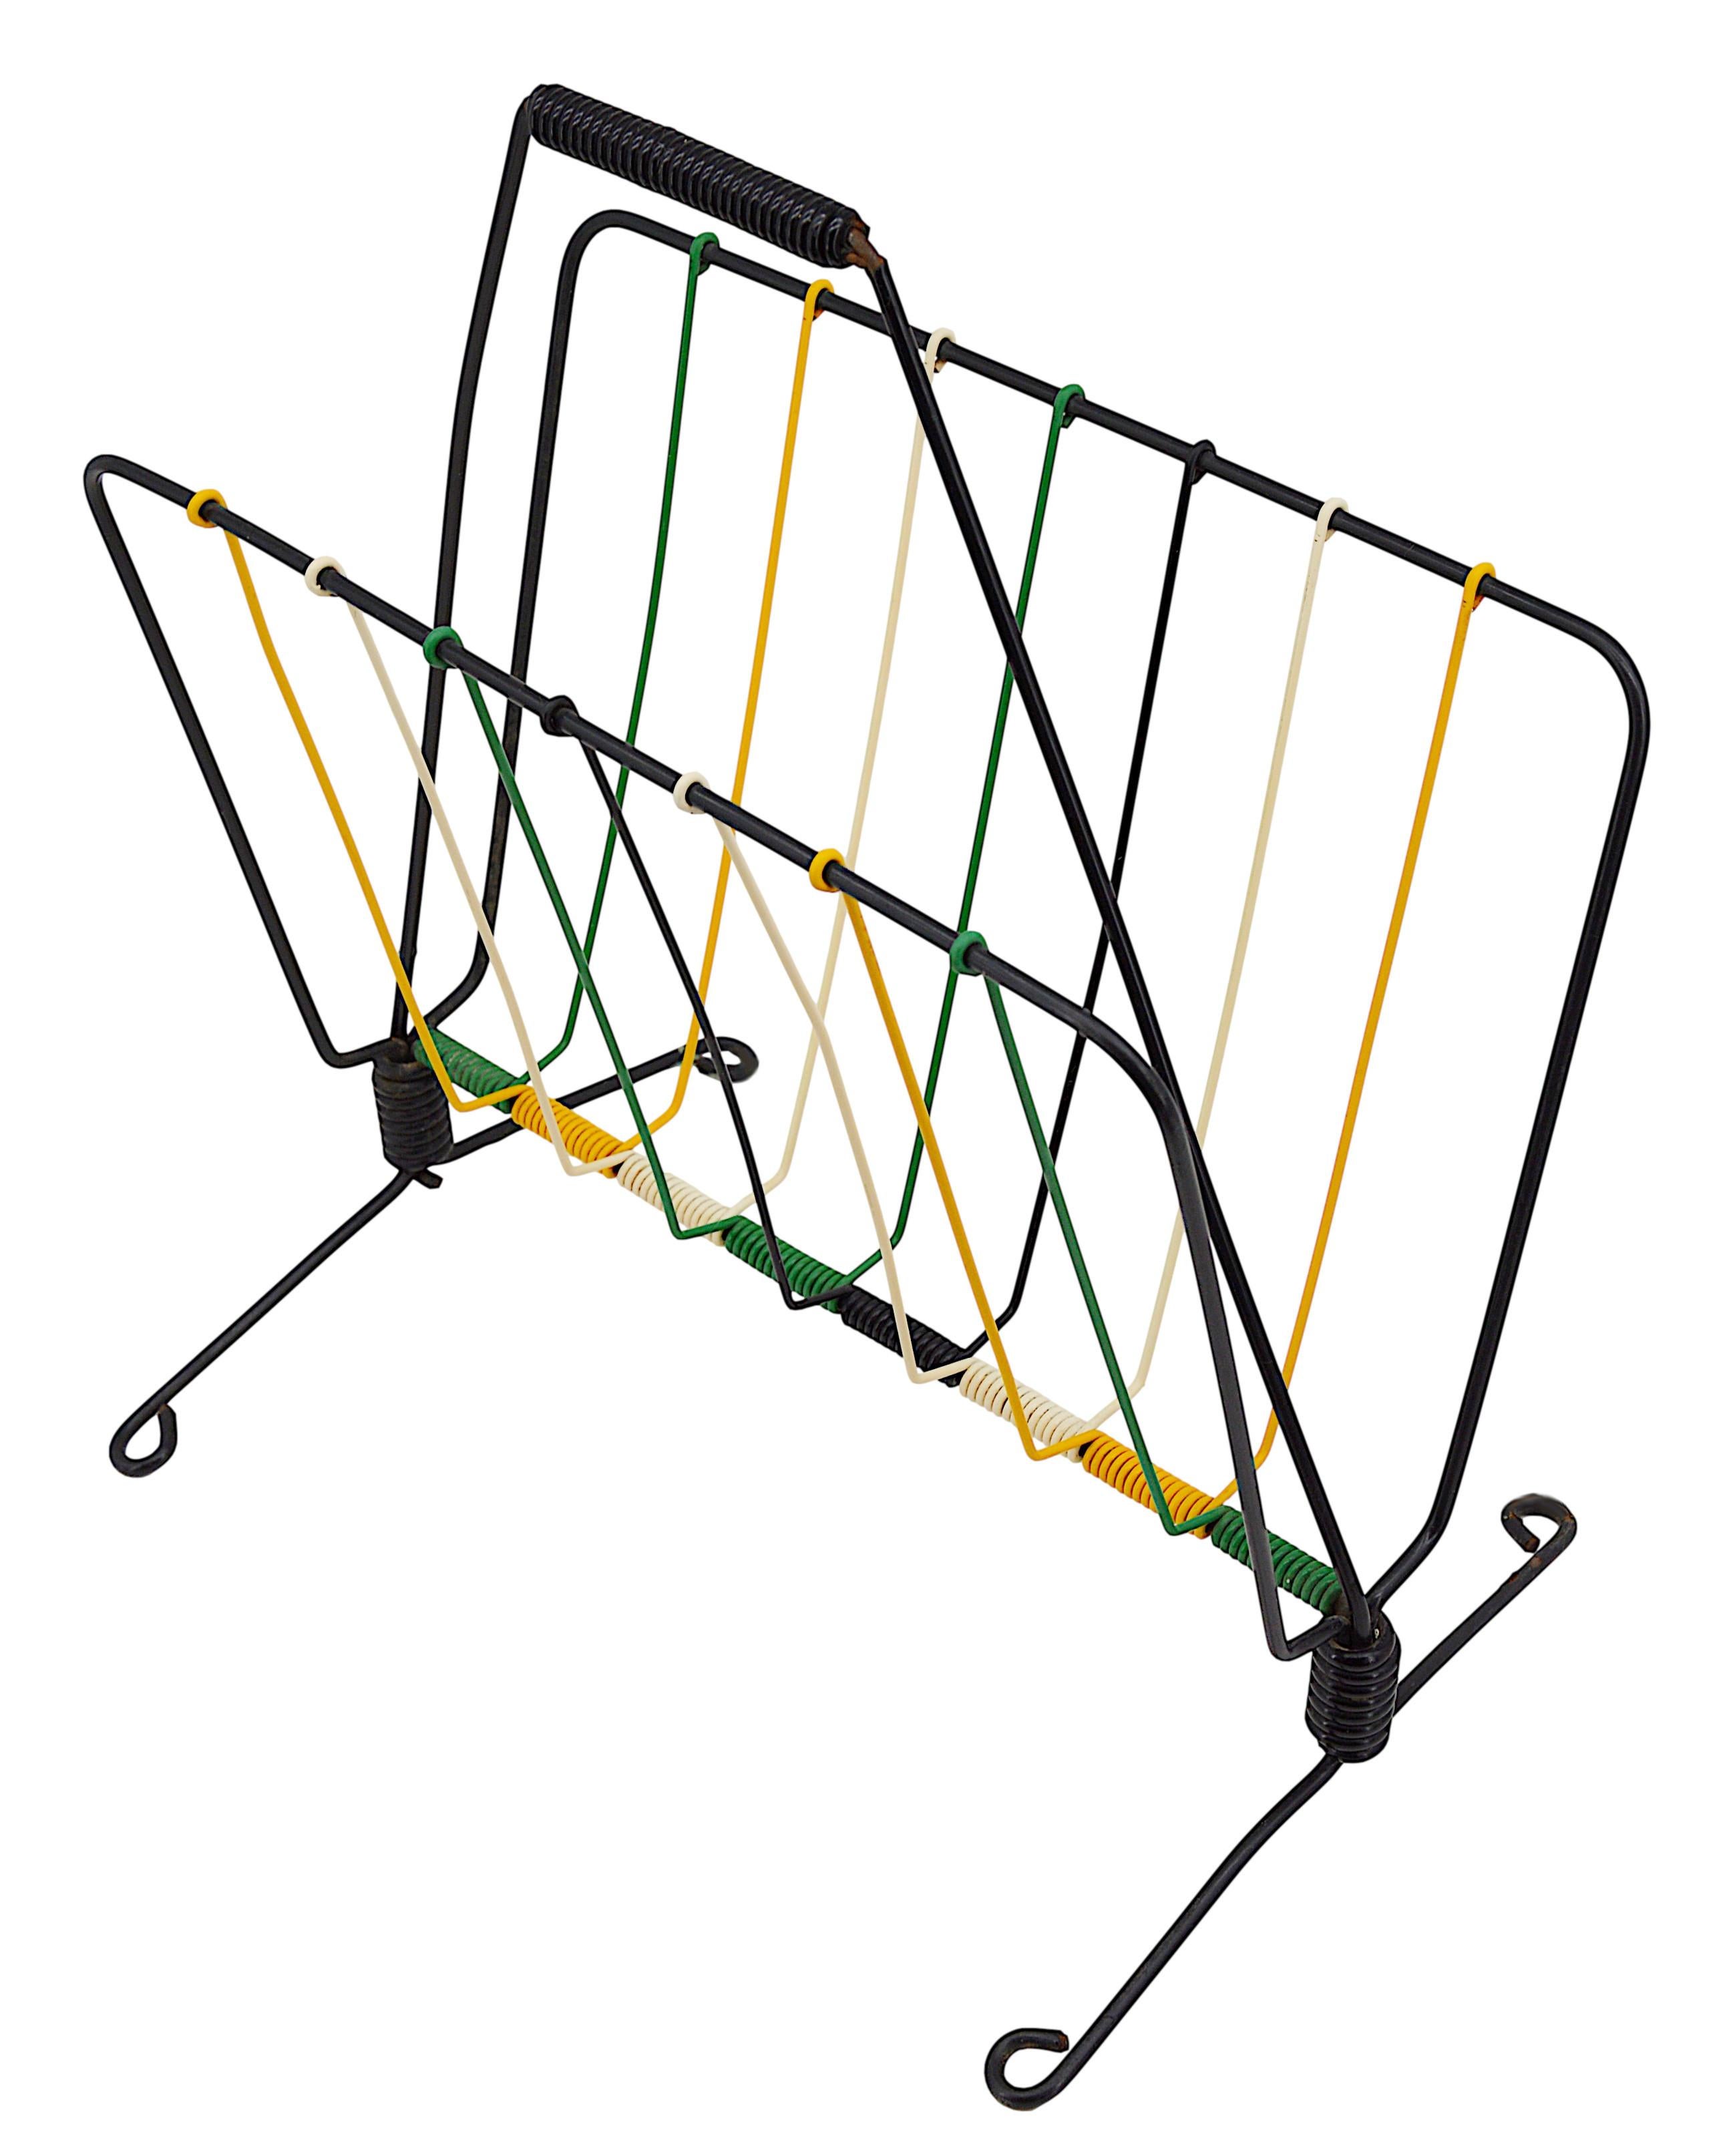 French midcentury magazine rack, France, 1950s. Plastic and iron. Measures: Height 16.3